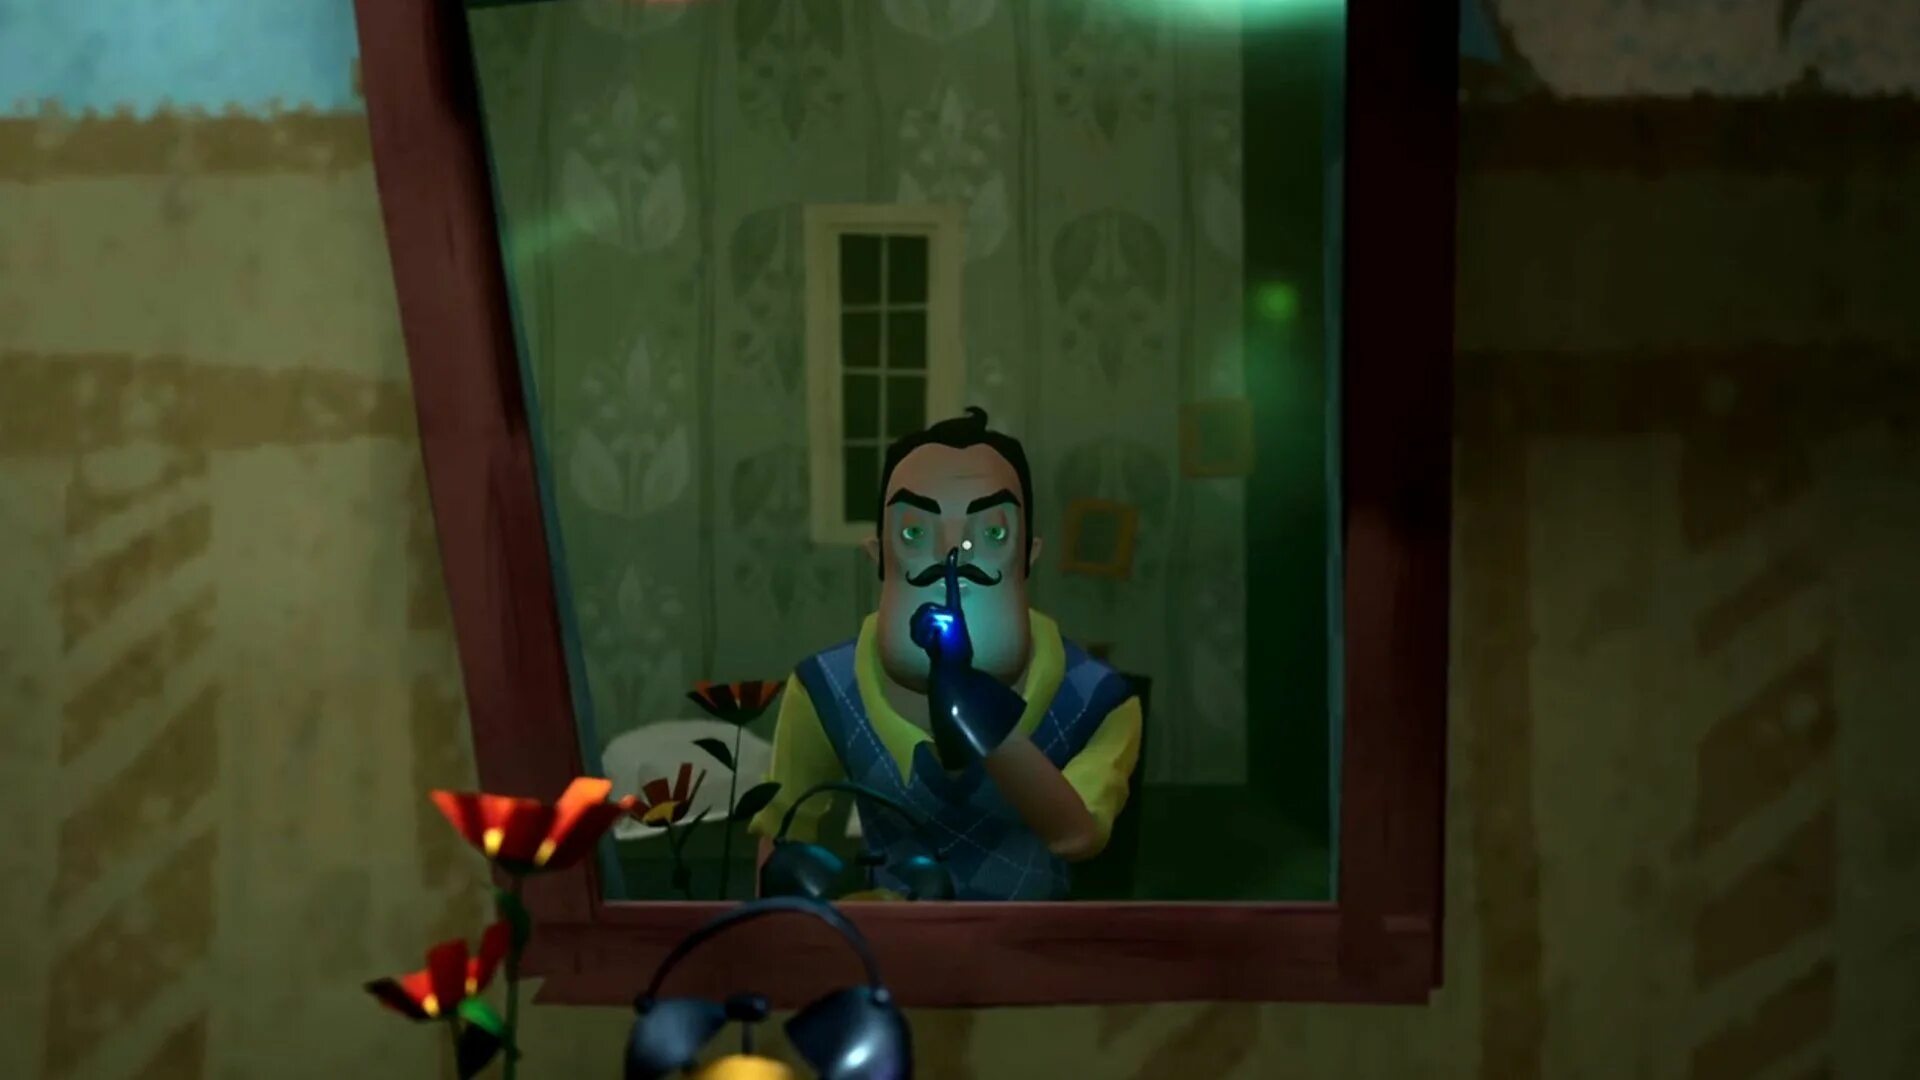 Thats not my neighbour русификатор. Привет сосед 2 секрет. Привет сосед секрет соседа hello Neighbor. Hello Neighbor Тринити. Привет сосед Альфа 1.